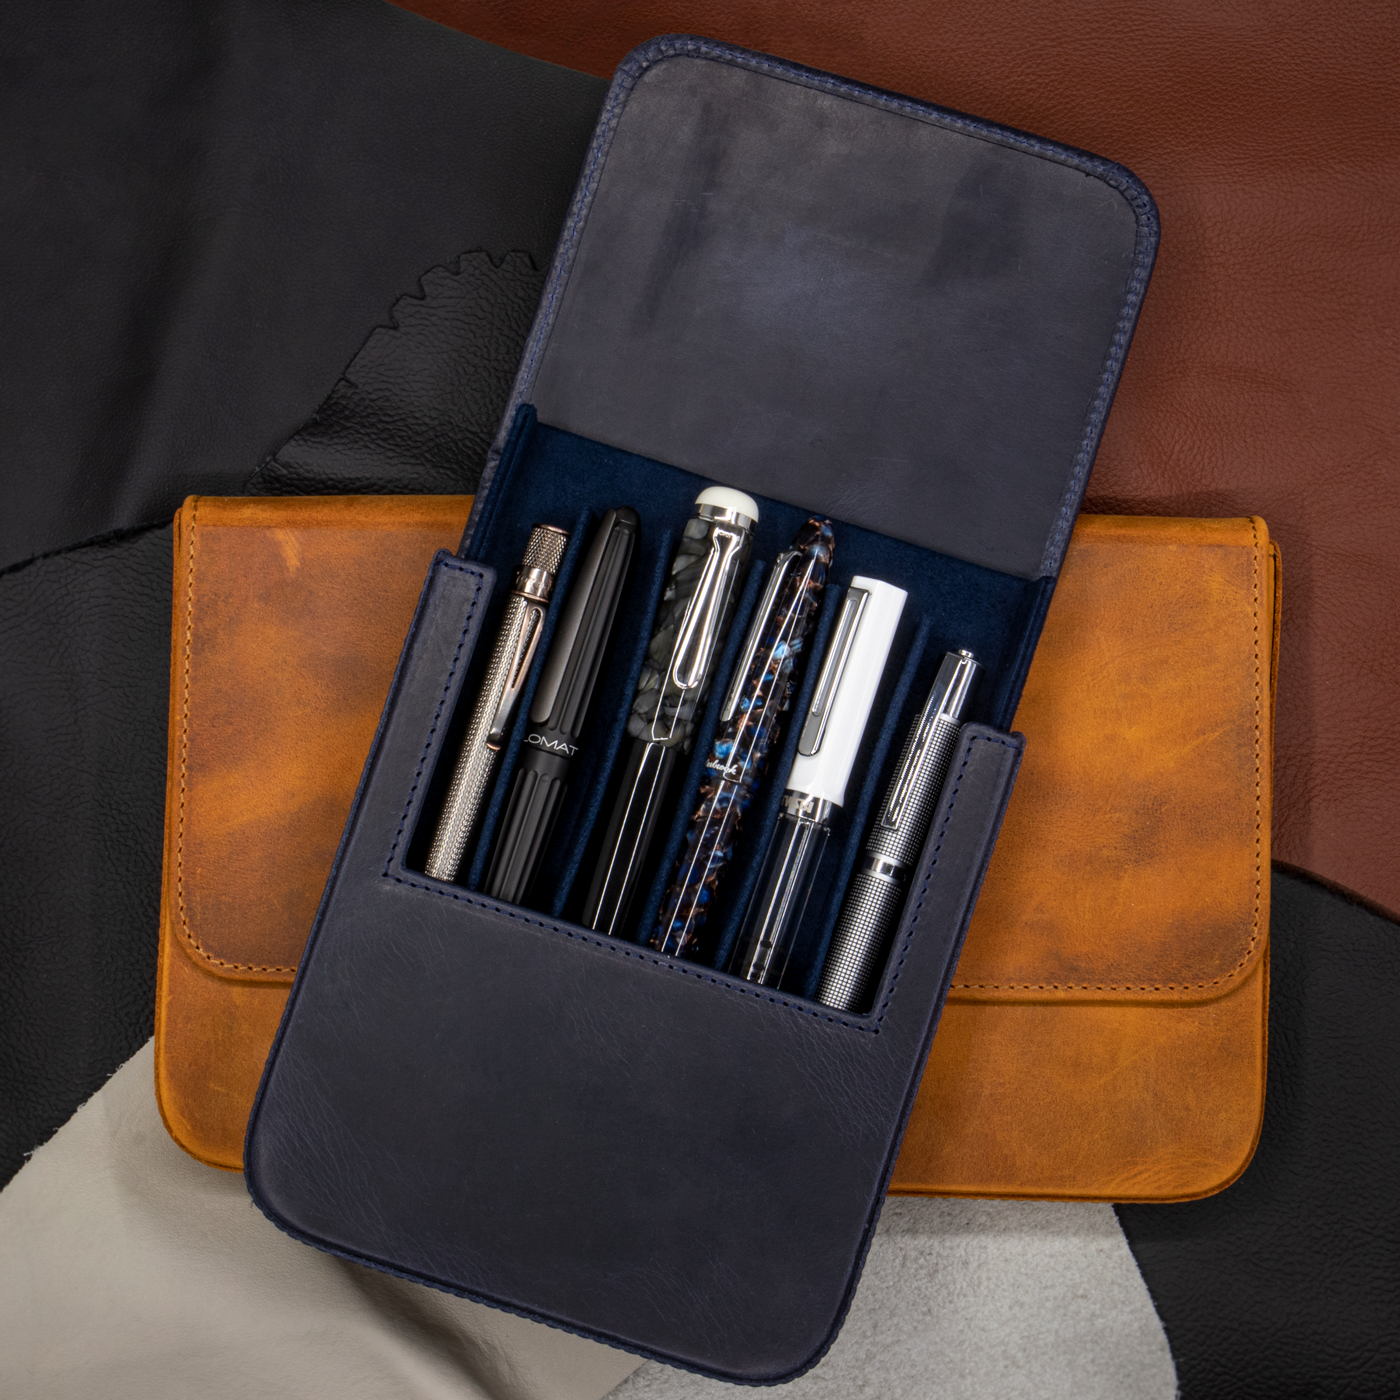 Navy Leather Hard Pen Case for 12 Fountain Pens - Galen Leather